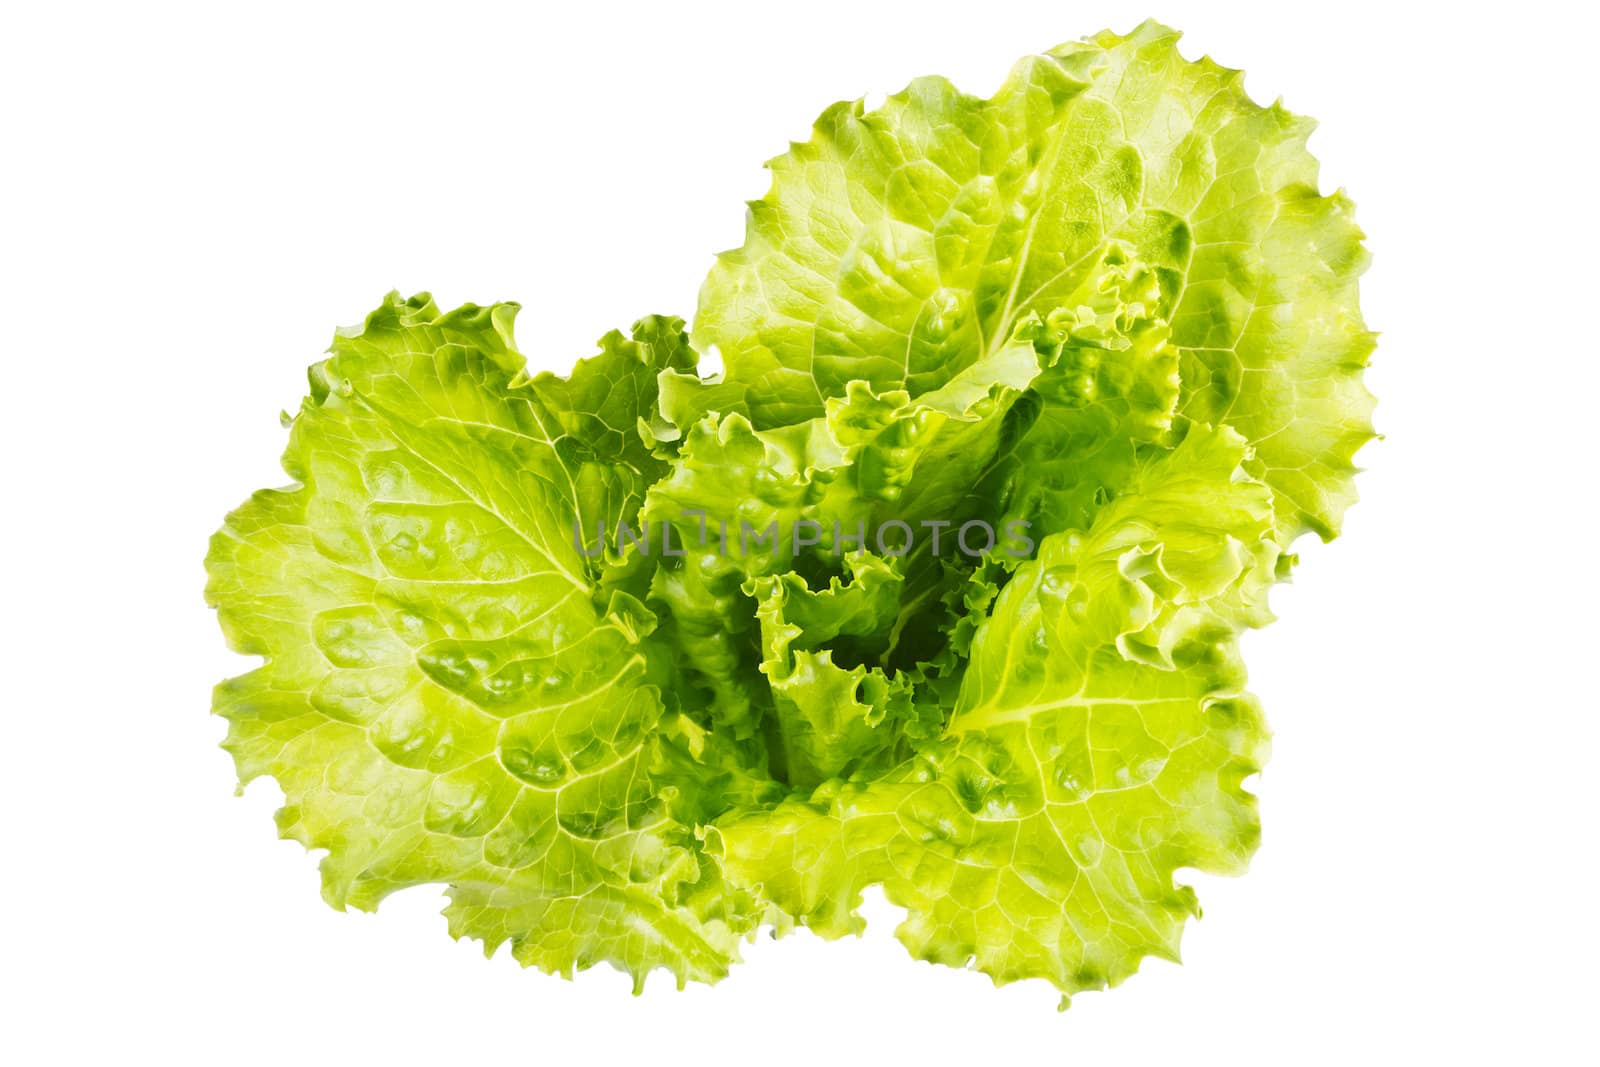 Fresh juicy lettuce leaves on a white background